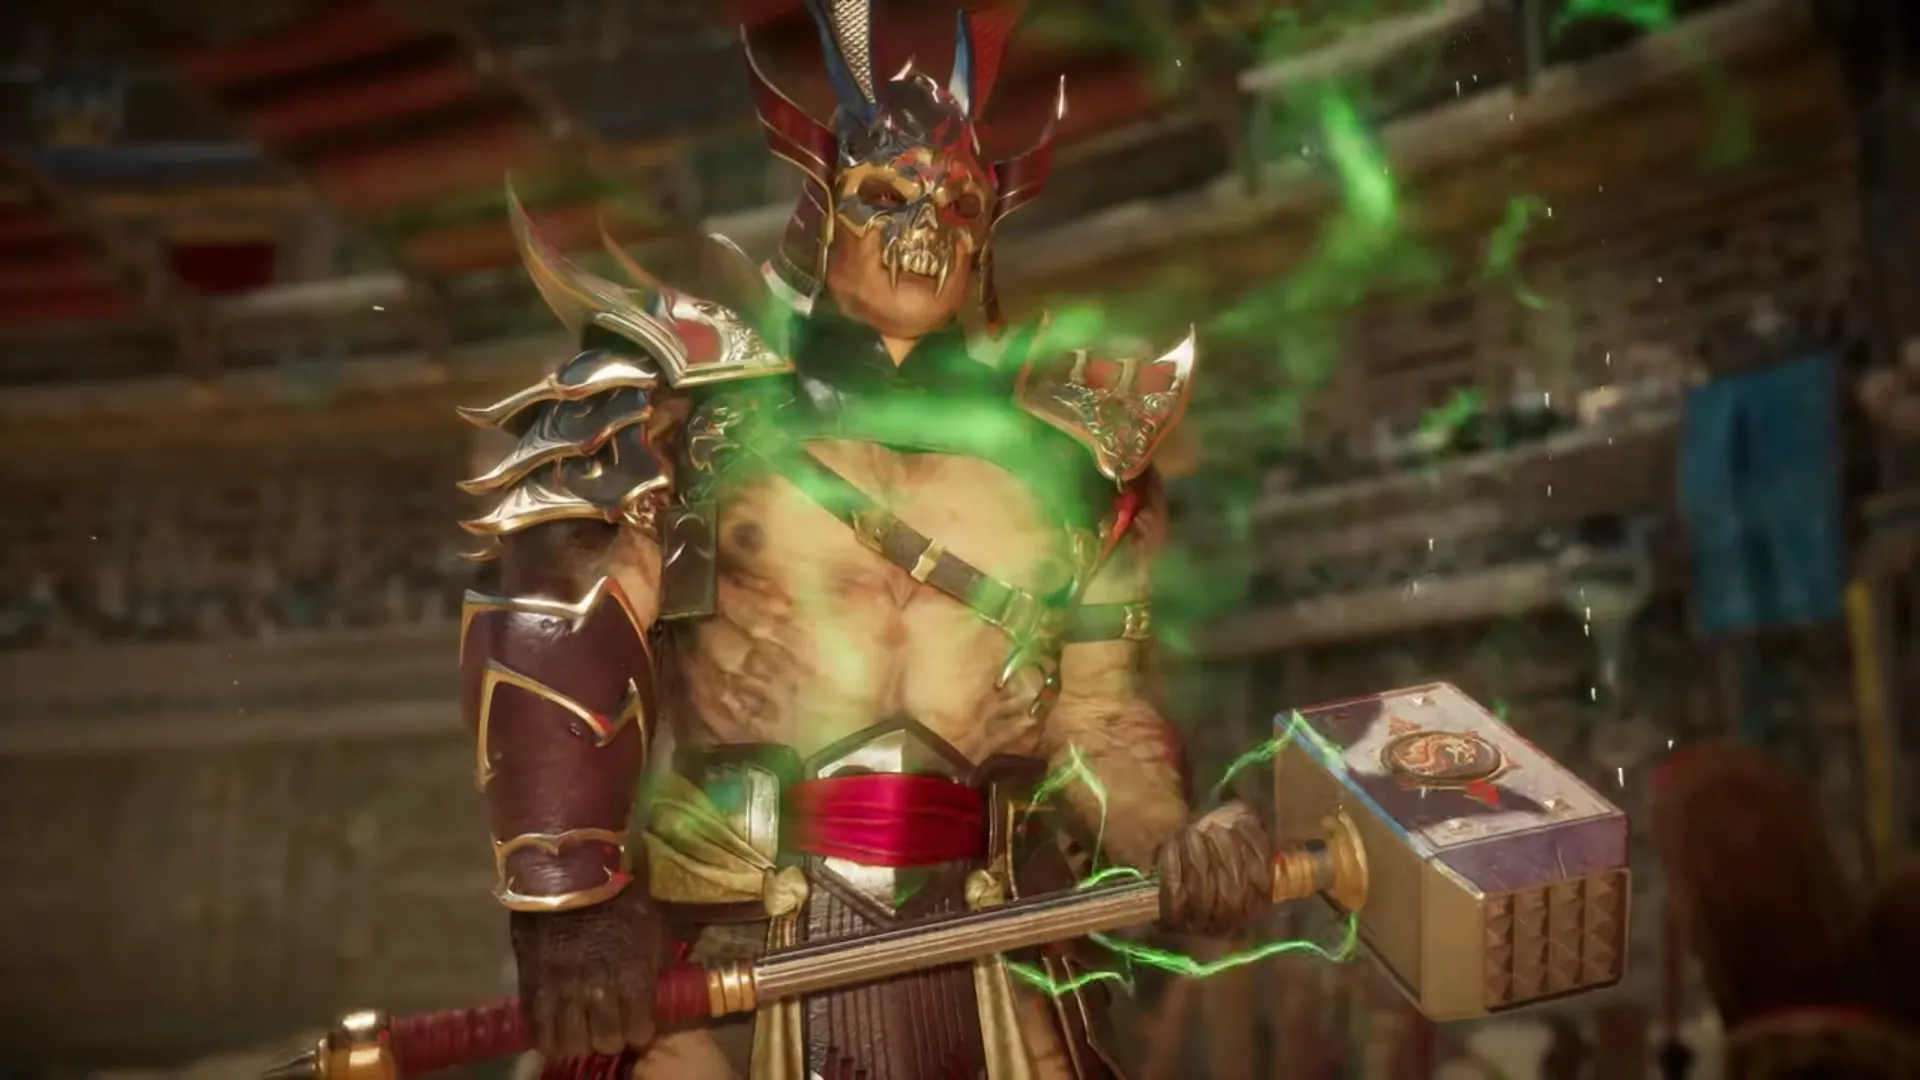 Shao Kahn looks to bring the BS to Mortal Kombat 11 – Destructoid